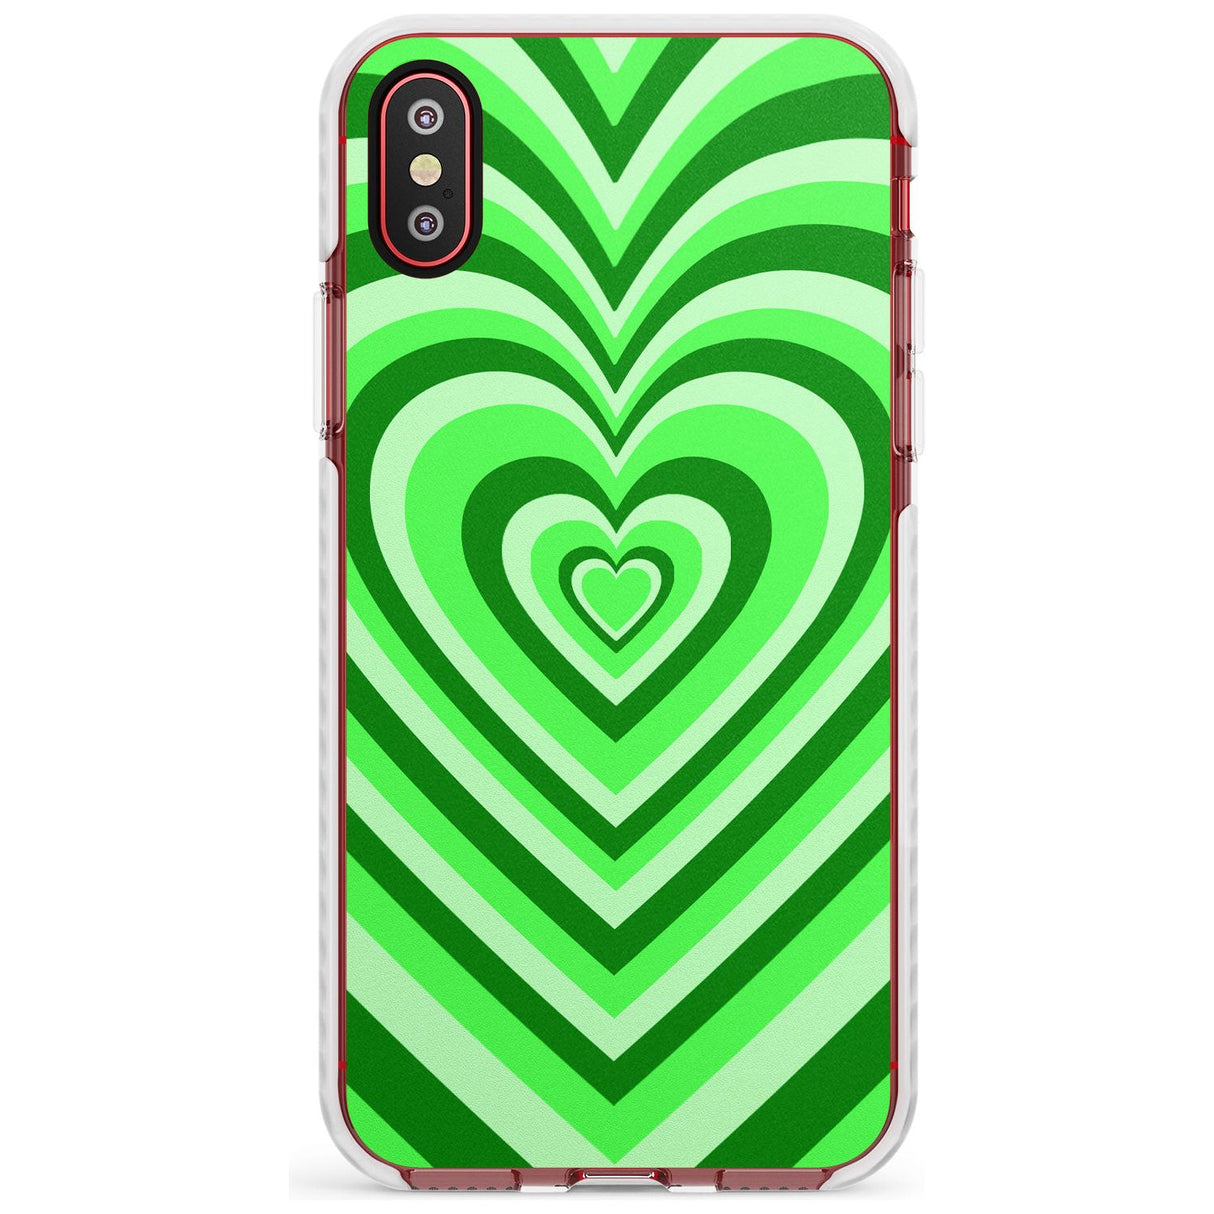 Green Heart Illusion Impact Phone Case for iPhone X XS Max XR